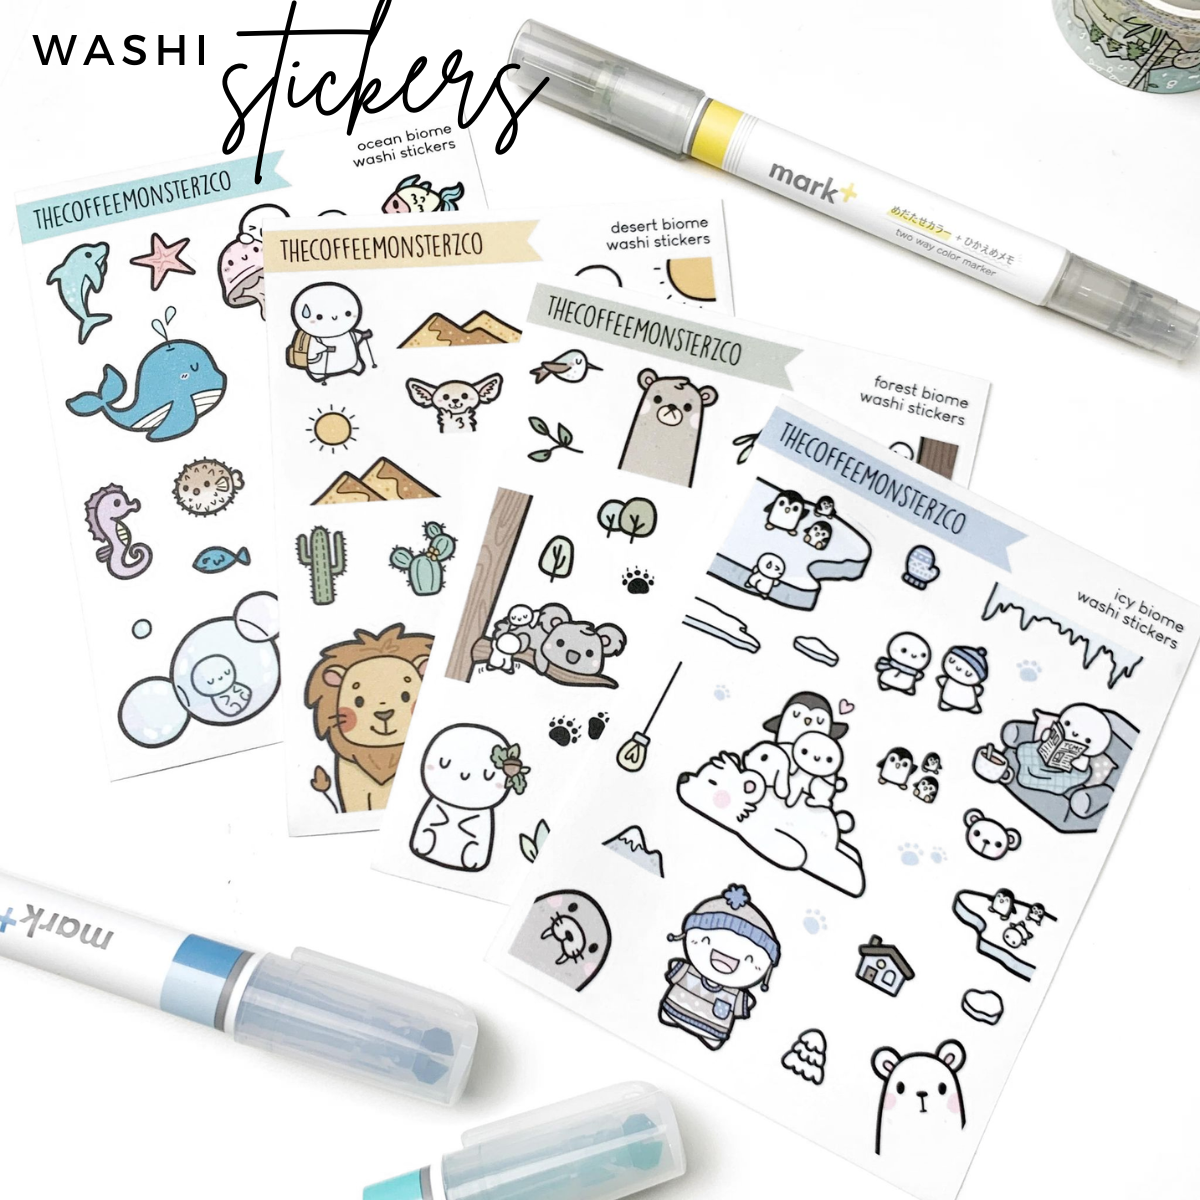 The Four Biomes Large Doodle Washi Stickers